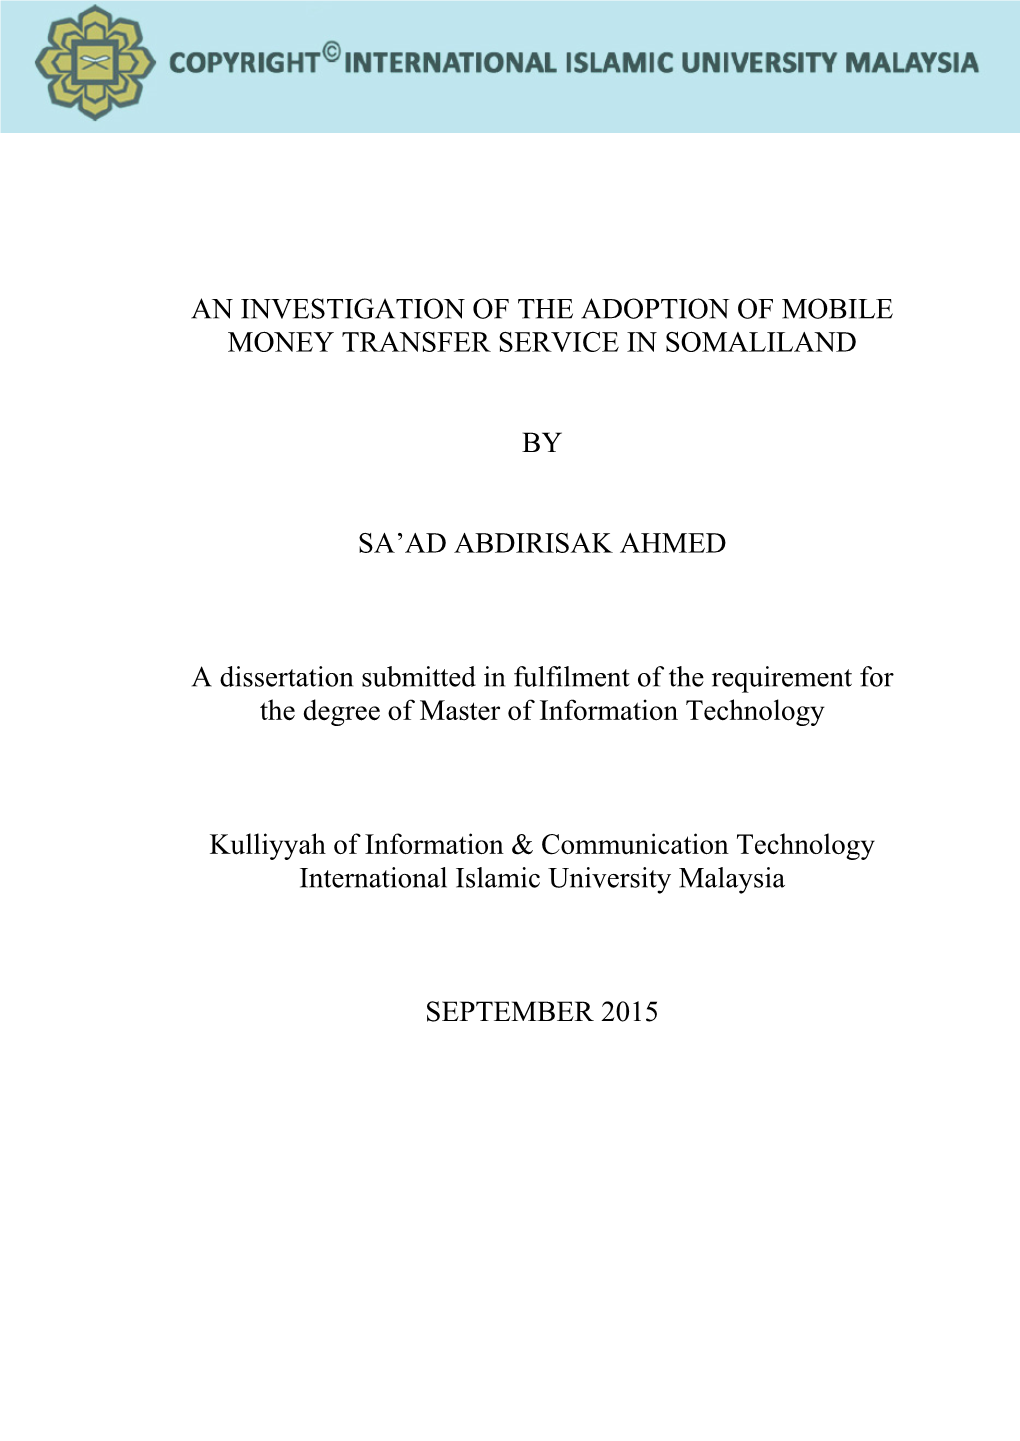 An Investigation of the Adoption of Mobile Money Transfer Service in Somaliland